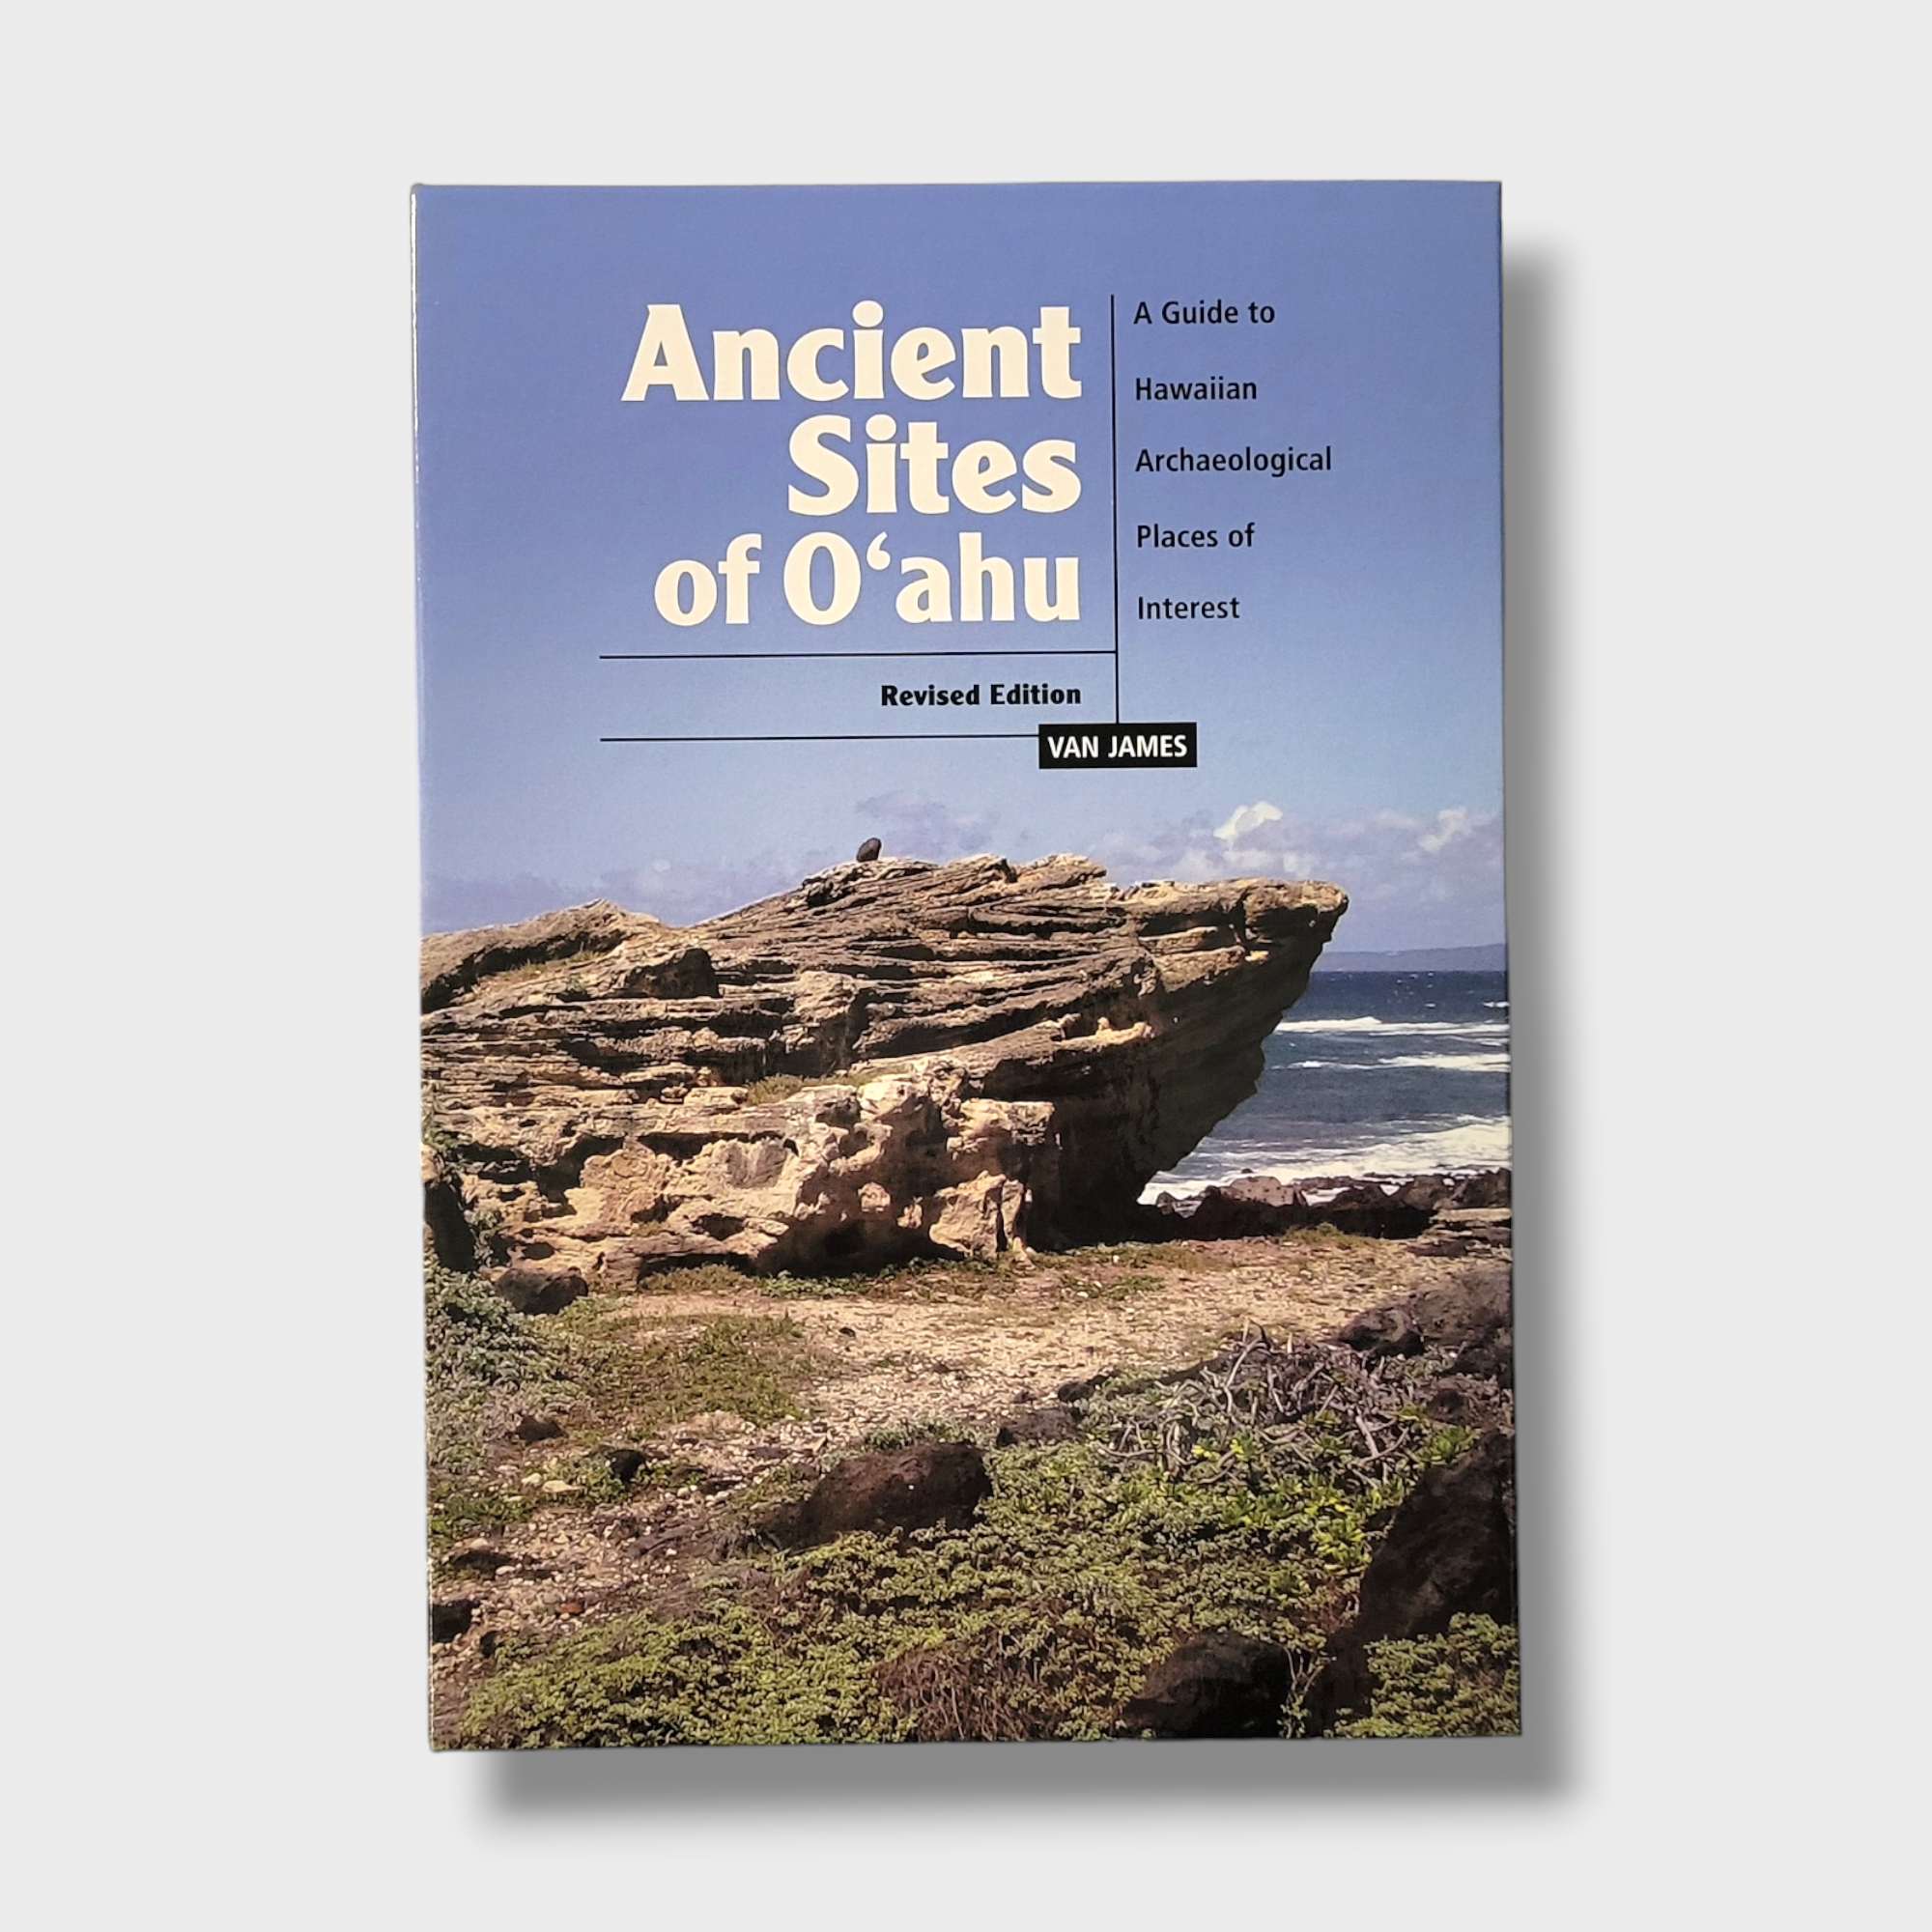 Ancient Sites of Oʻahu: A Guide to Hawaiian Archaeological Places of Interest, Revised Edition